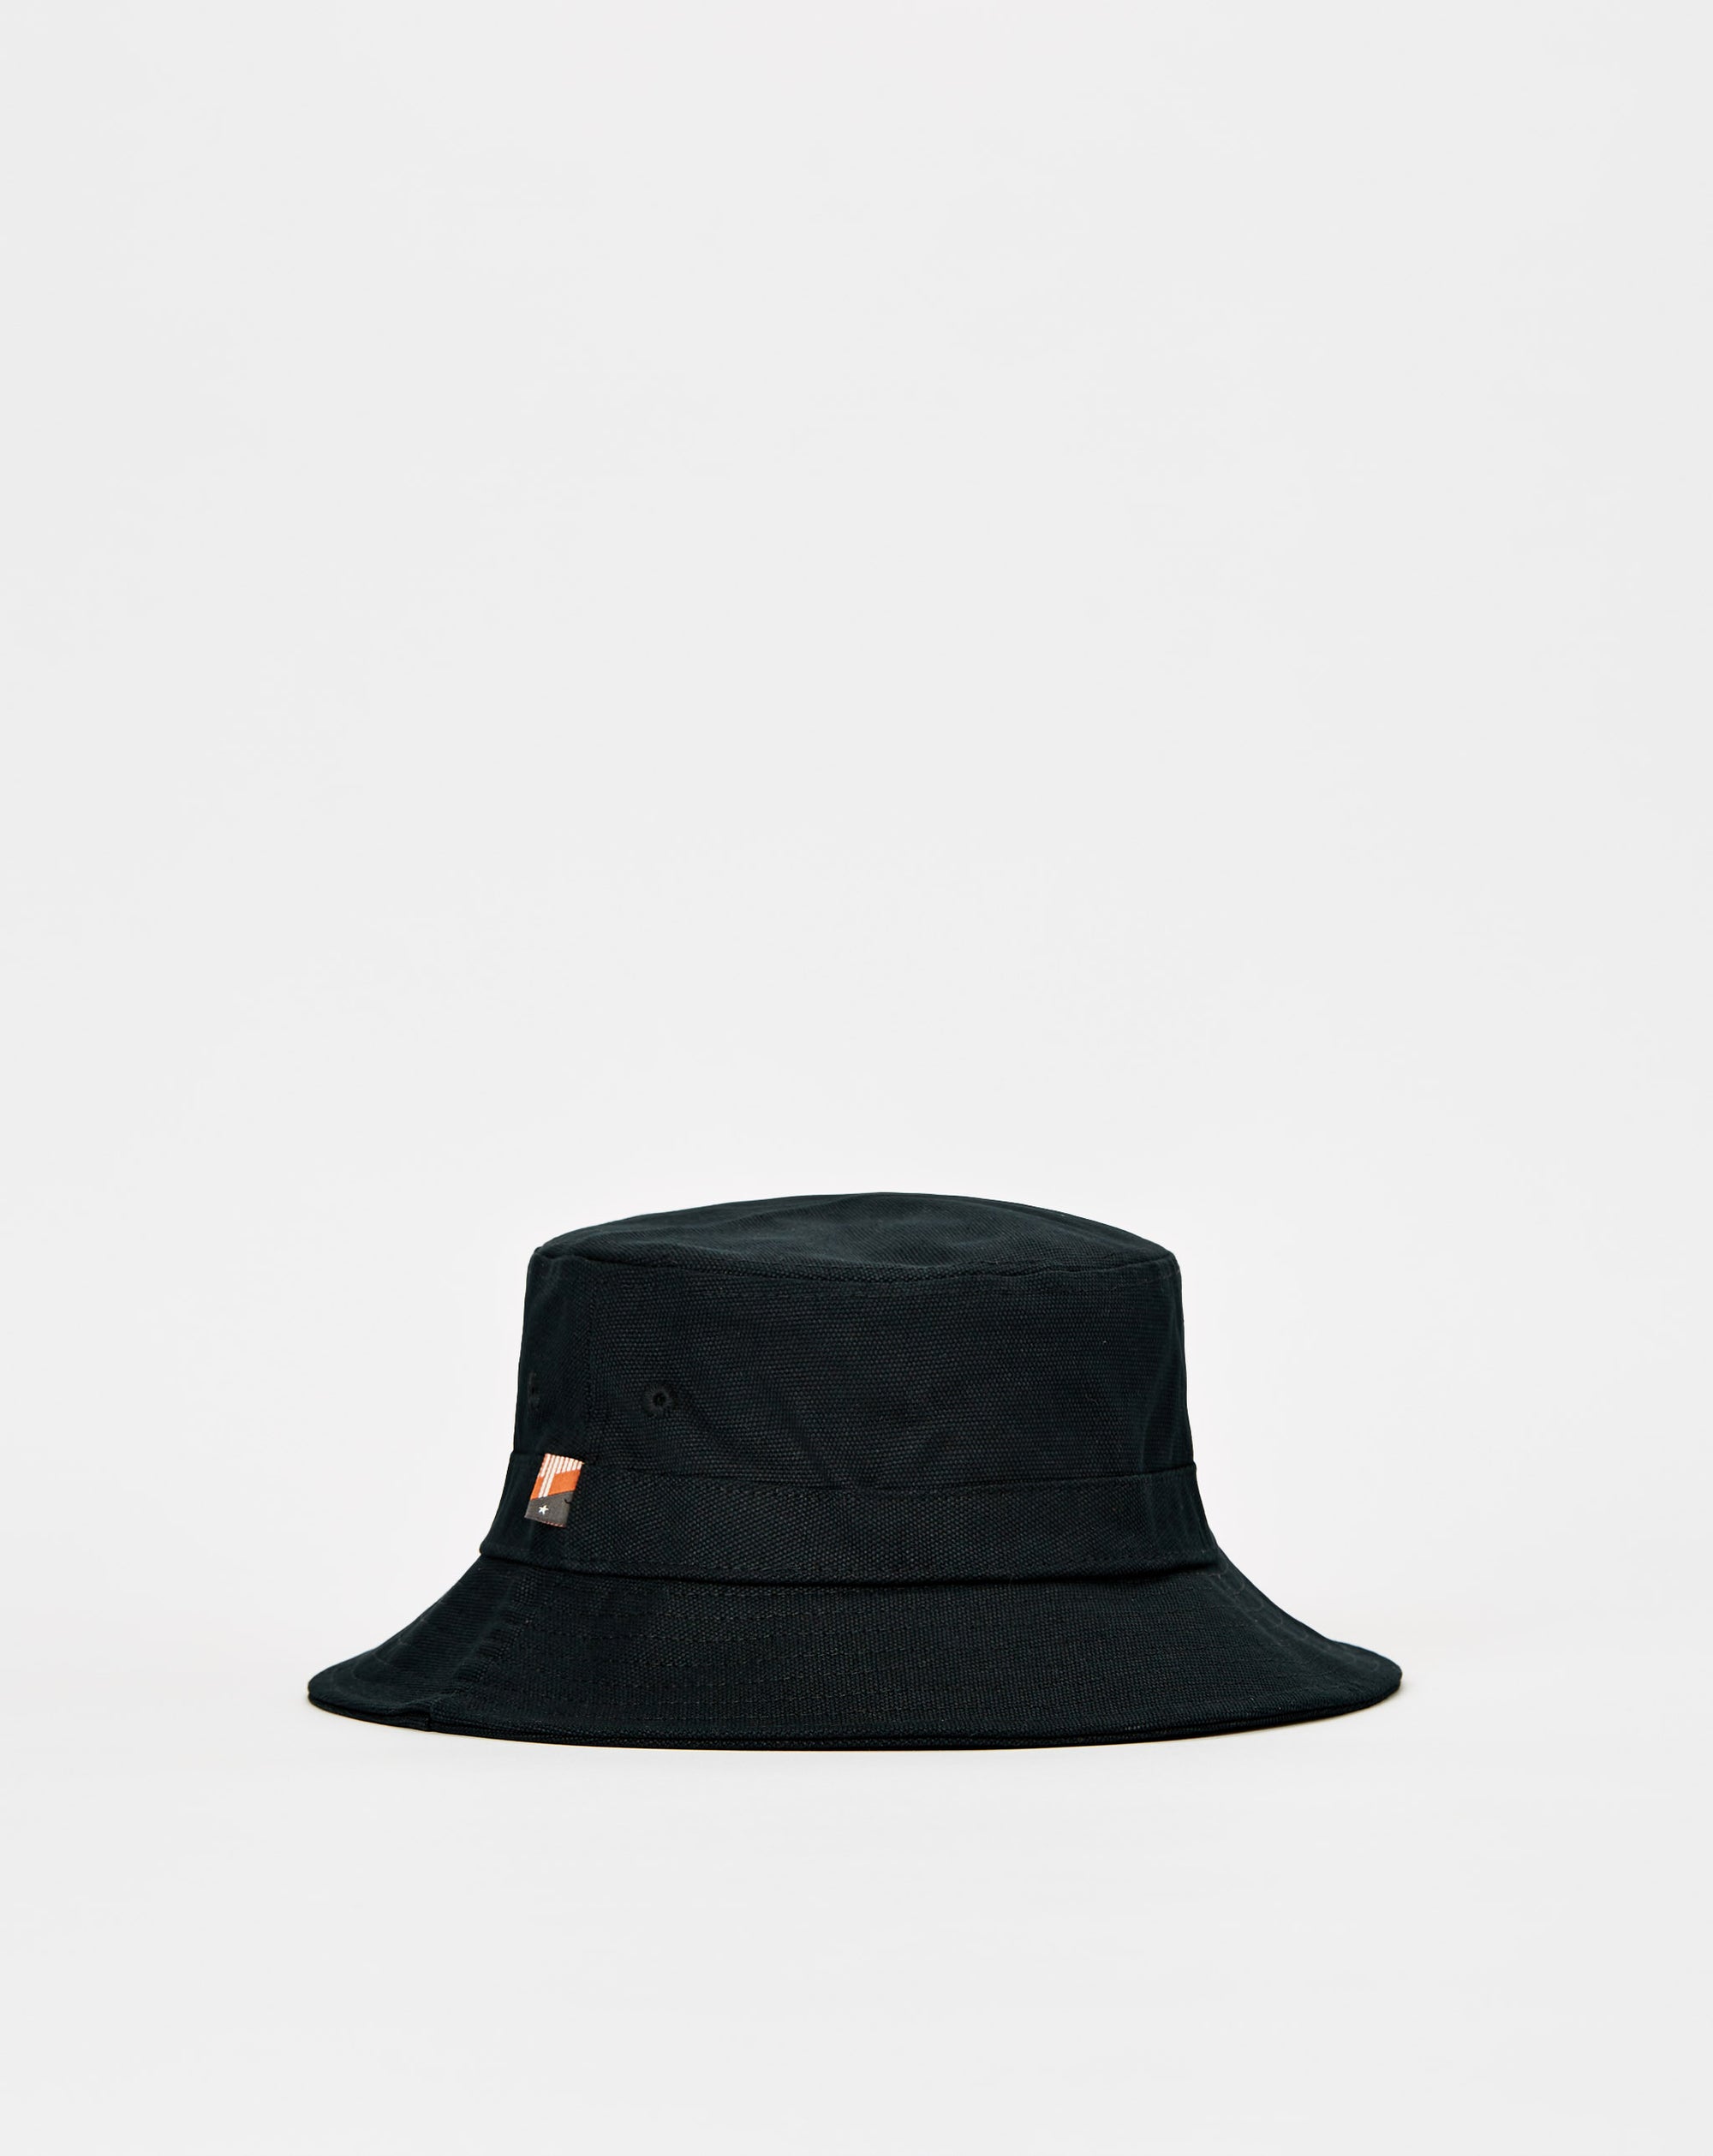 Honor The Gift Script Bucket Hat - Rule of Next Accessories